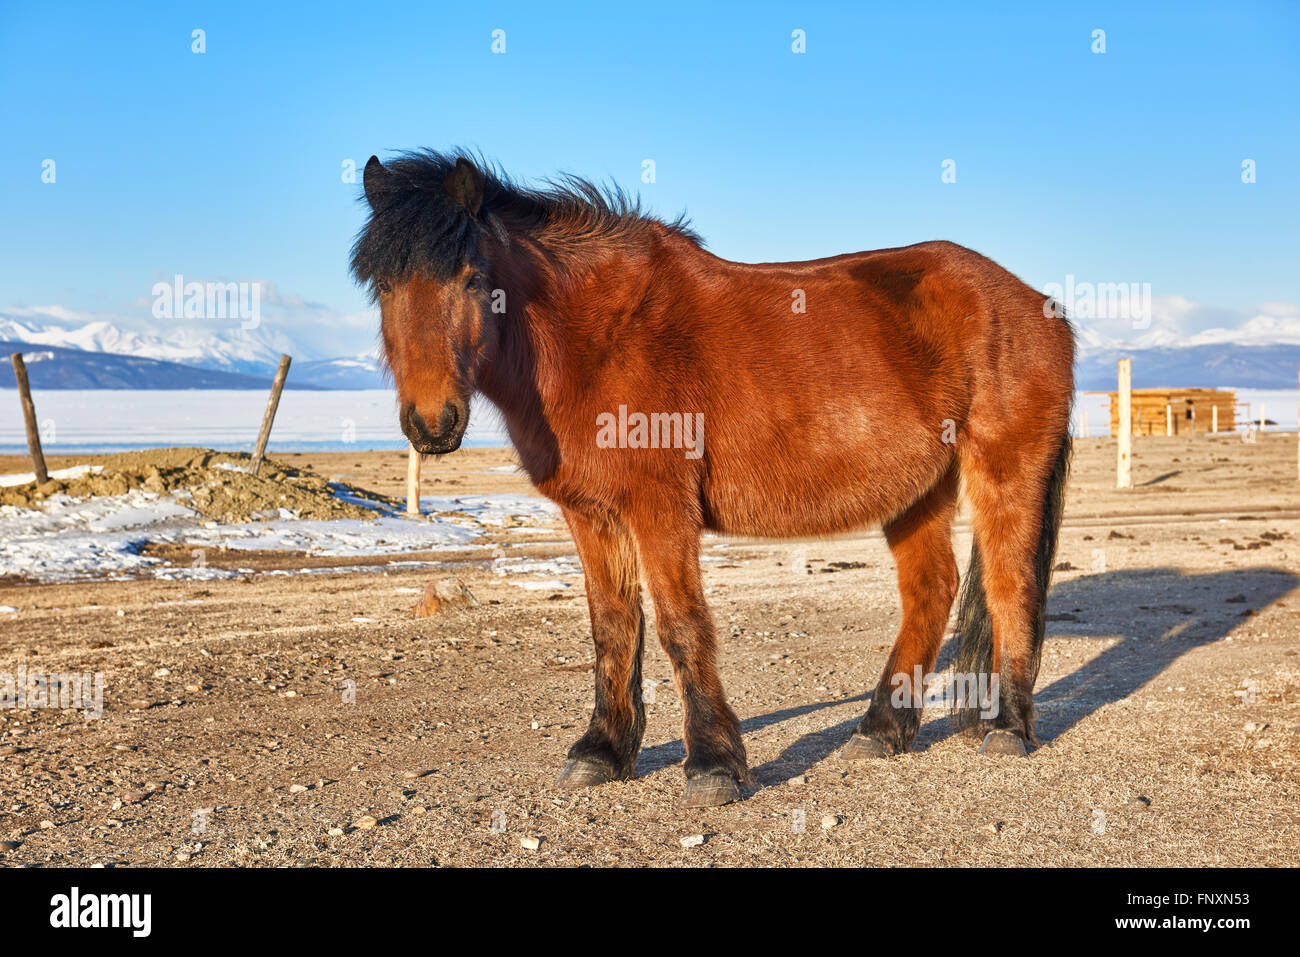 Mongolian horse standing with head raised and looking at the picture. Taken at Lake Hovsgol . Mongolia Stock Photo